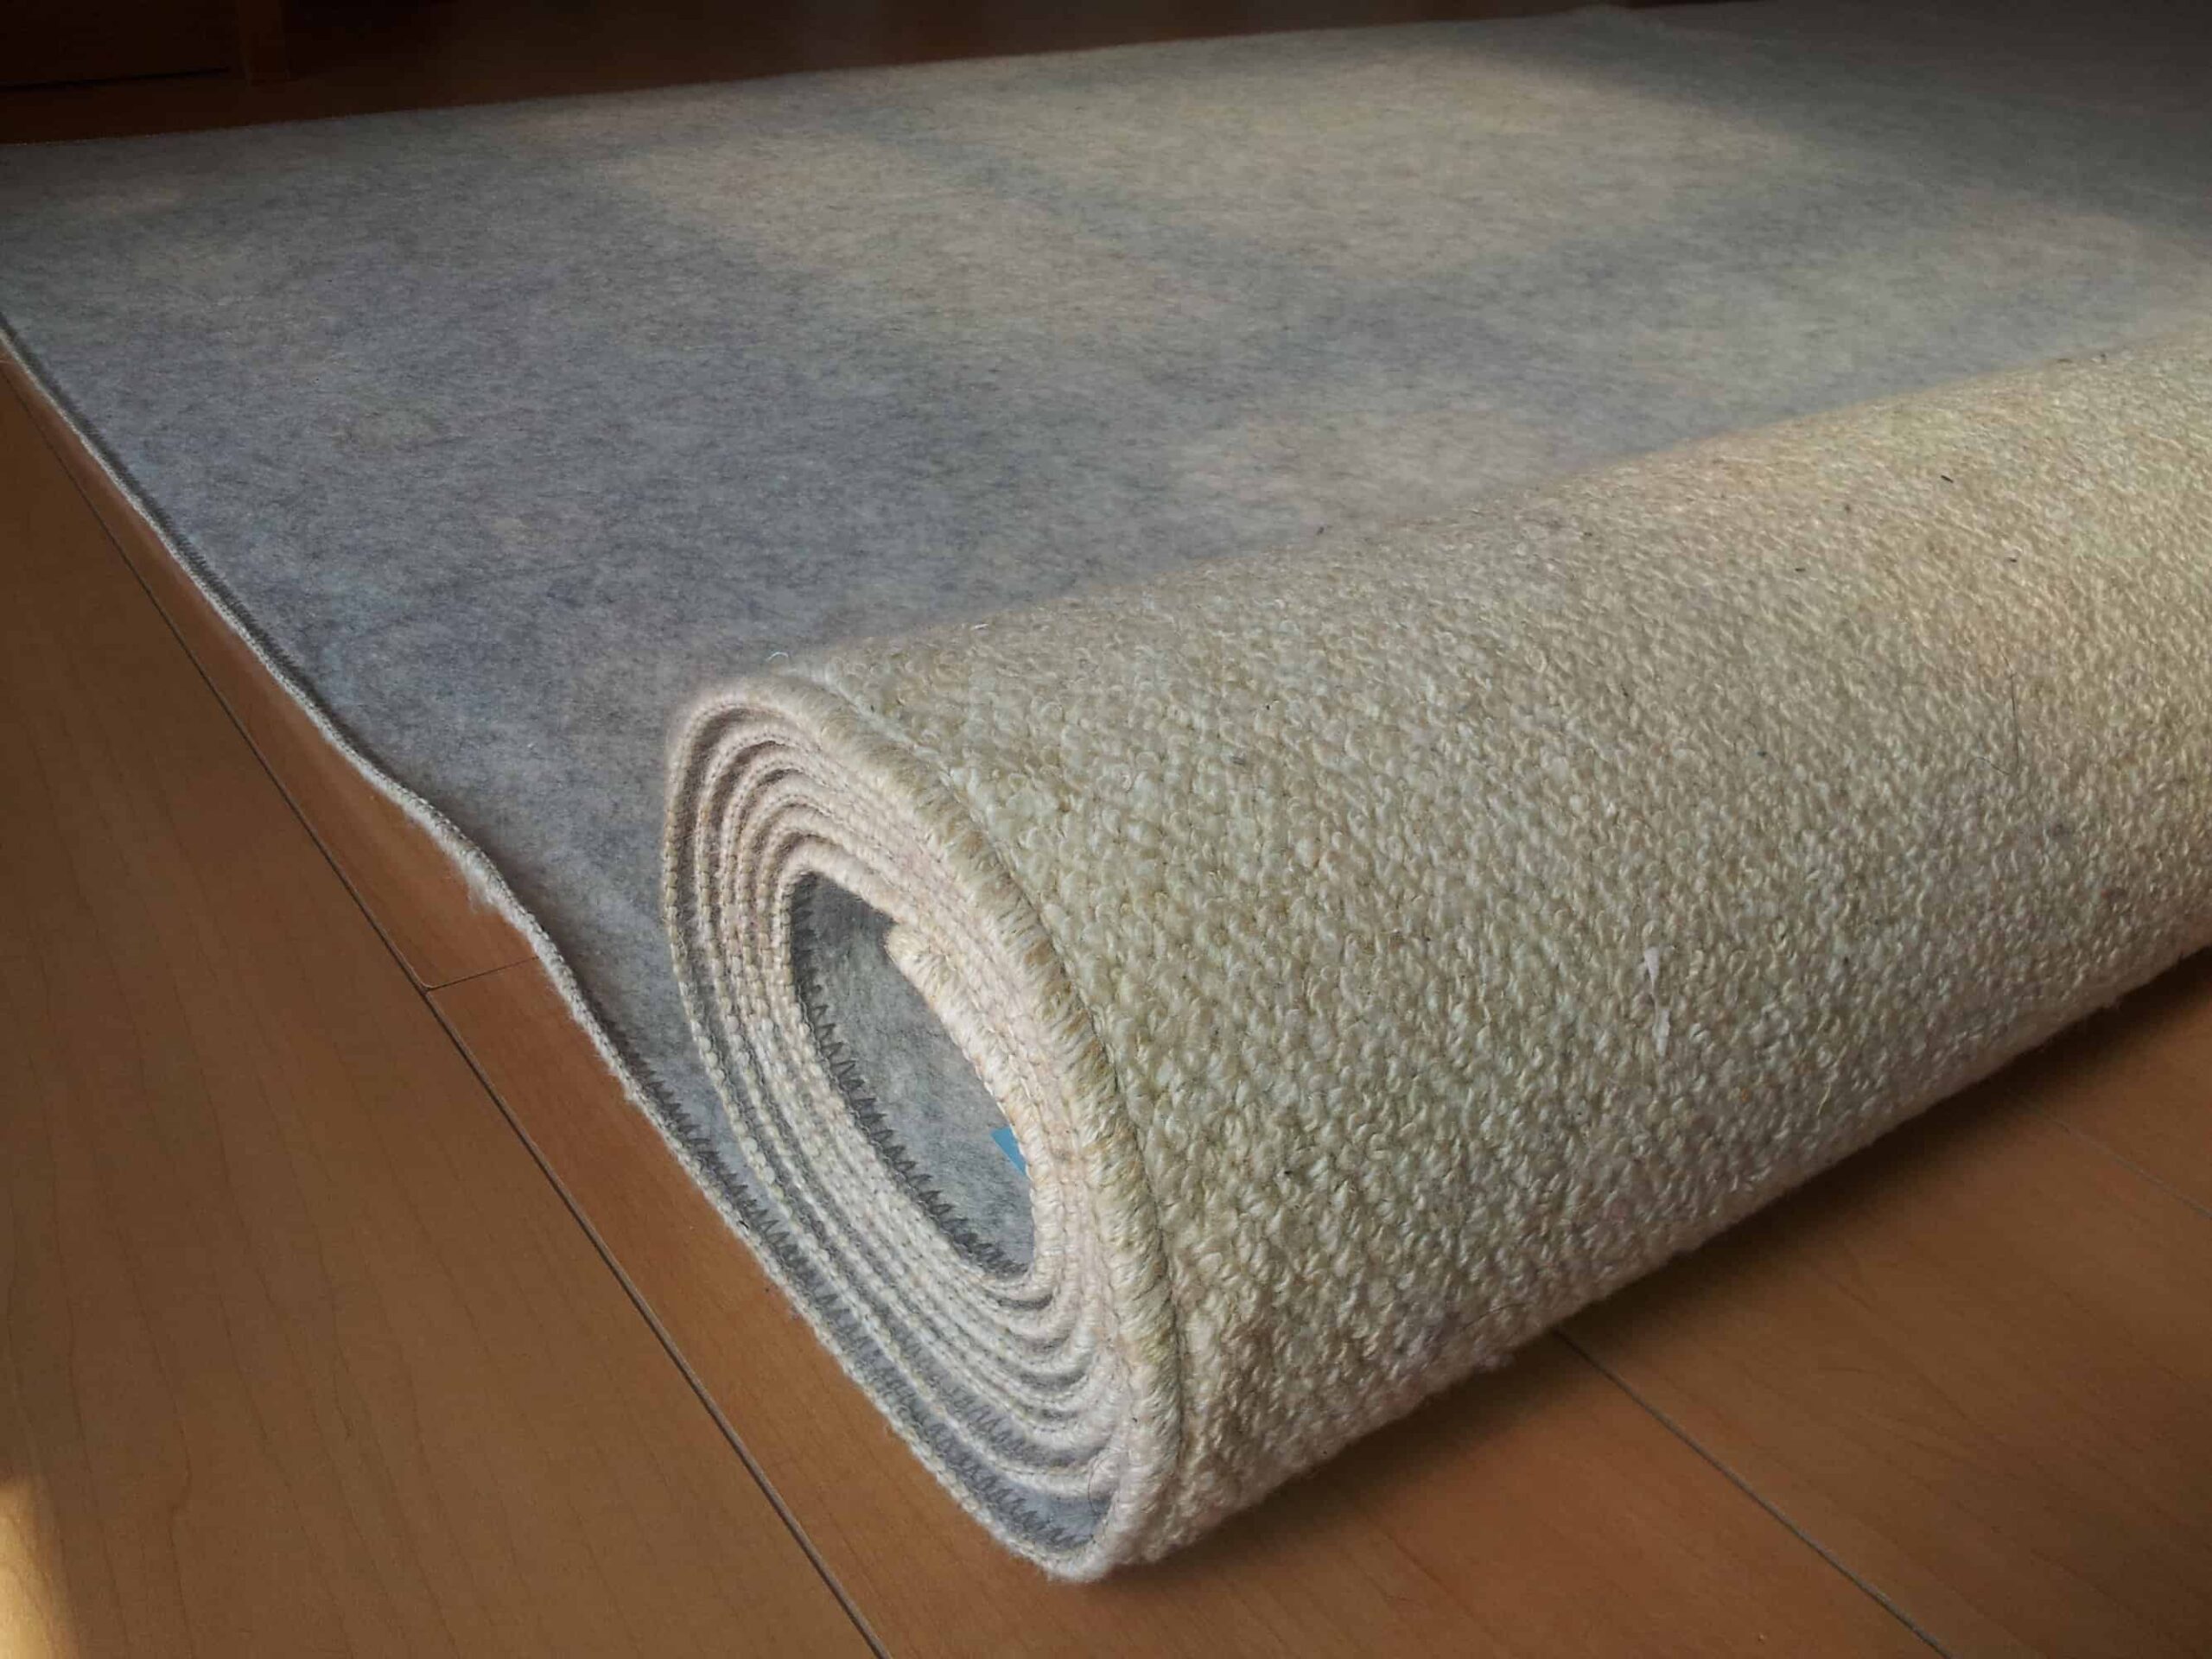 The Rugs We Roll - Six Steps for Doing It Right - Moving Advice